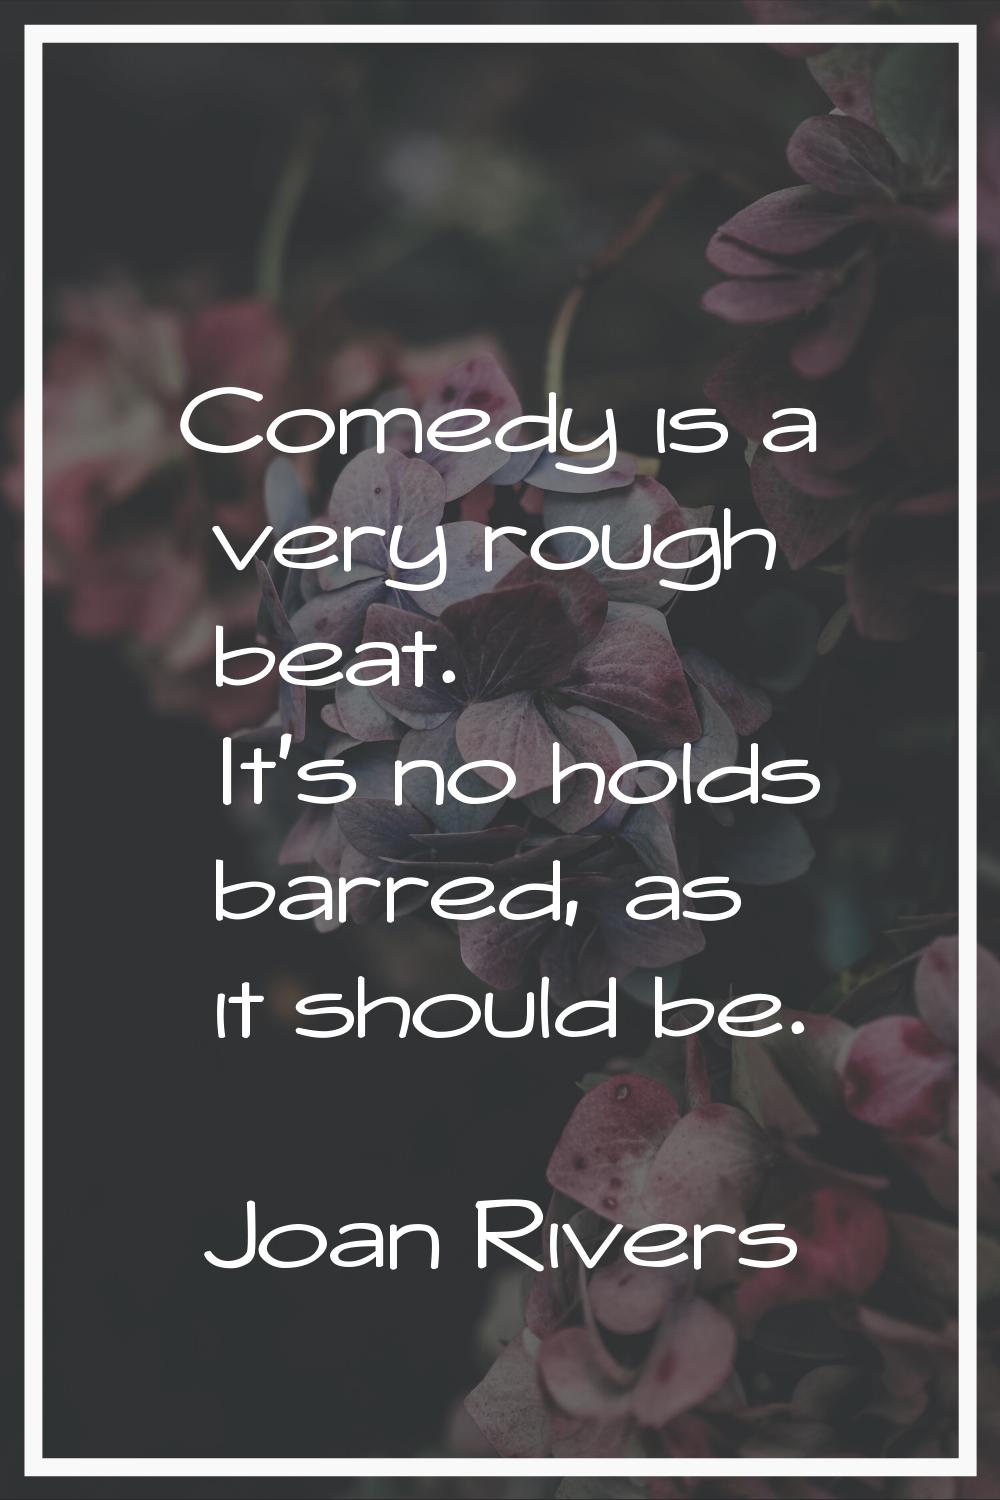 Comedy is a very rough beat. It's no holds barred, as it should be.